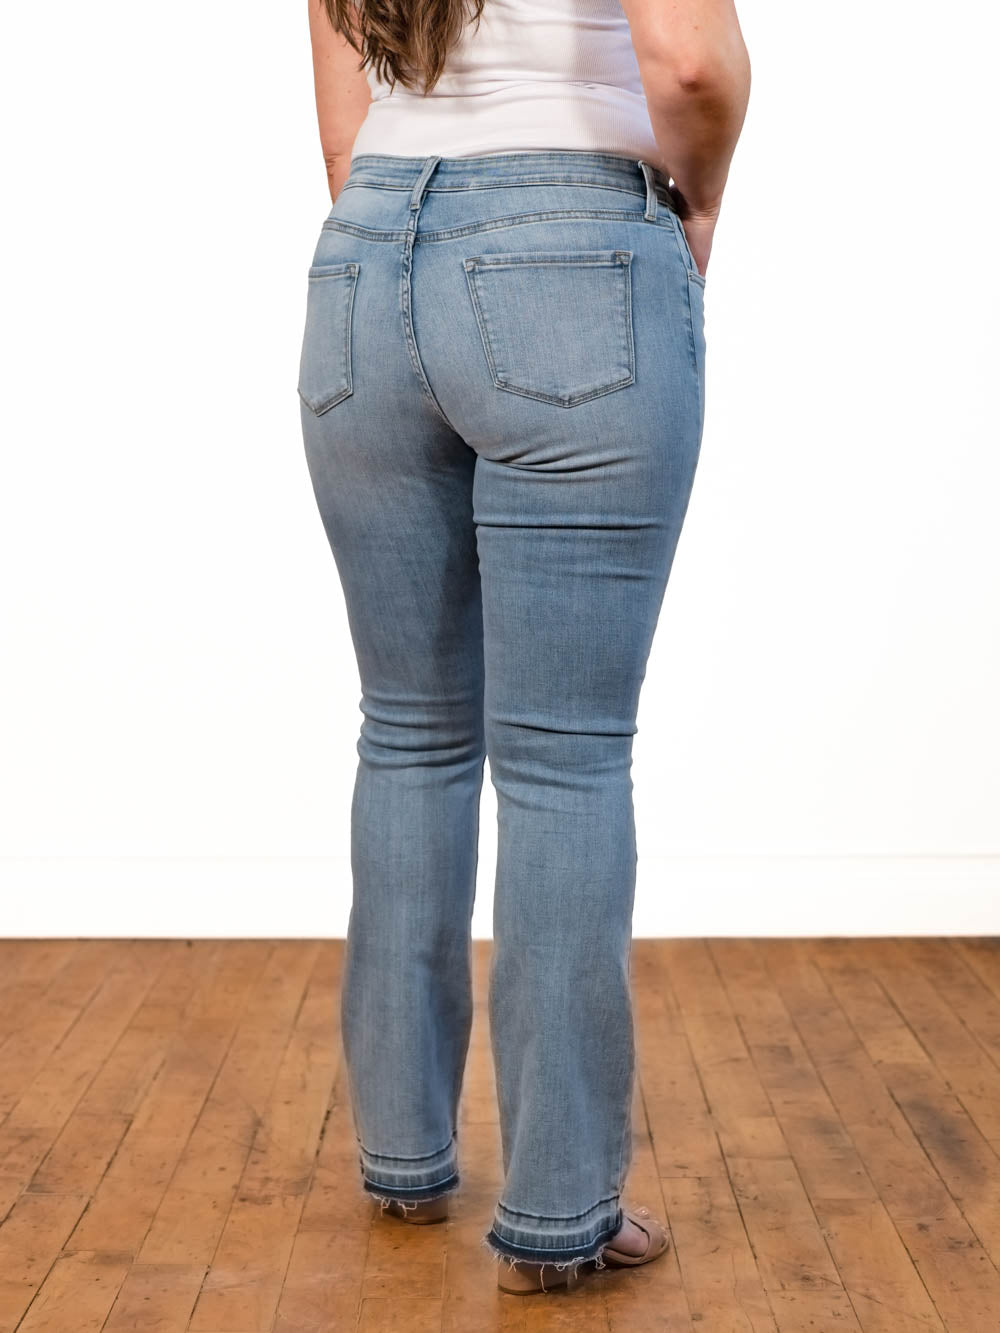 LTB Jeans Molly - 36 & 38 inseam - jeans for tall women